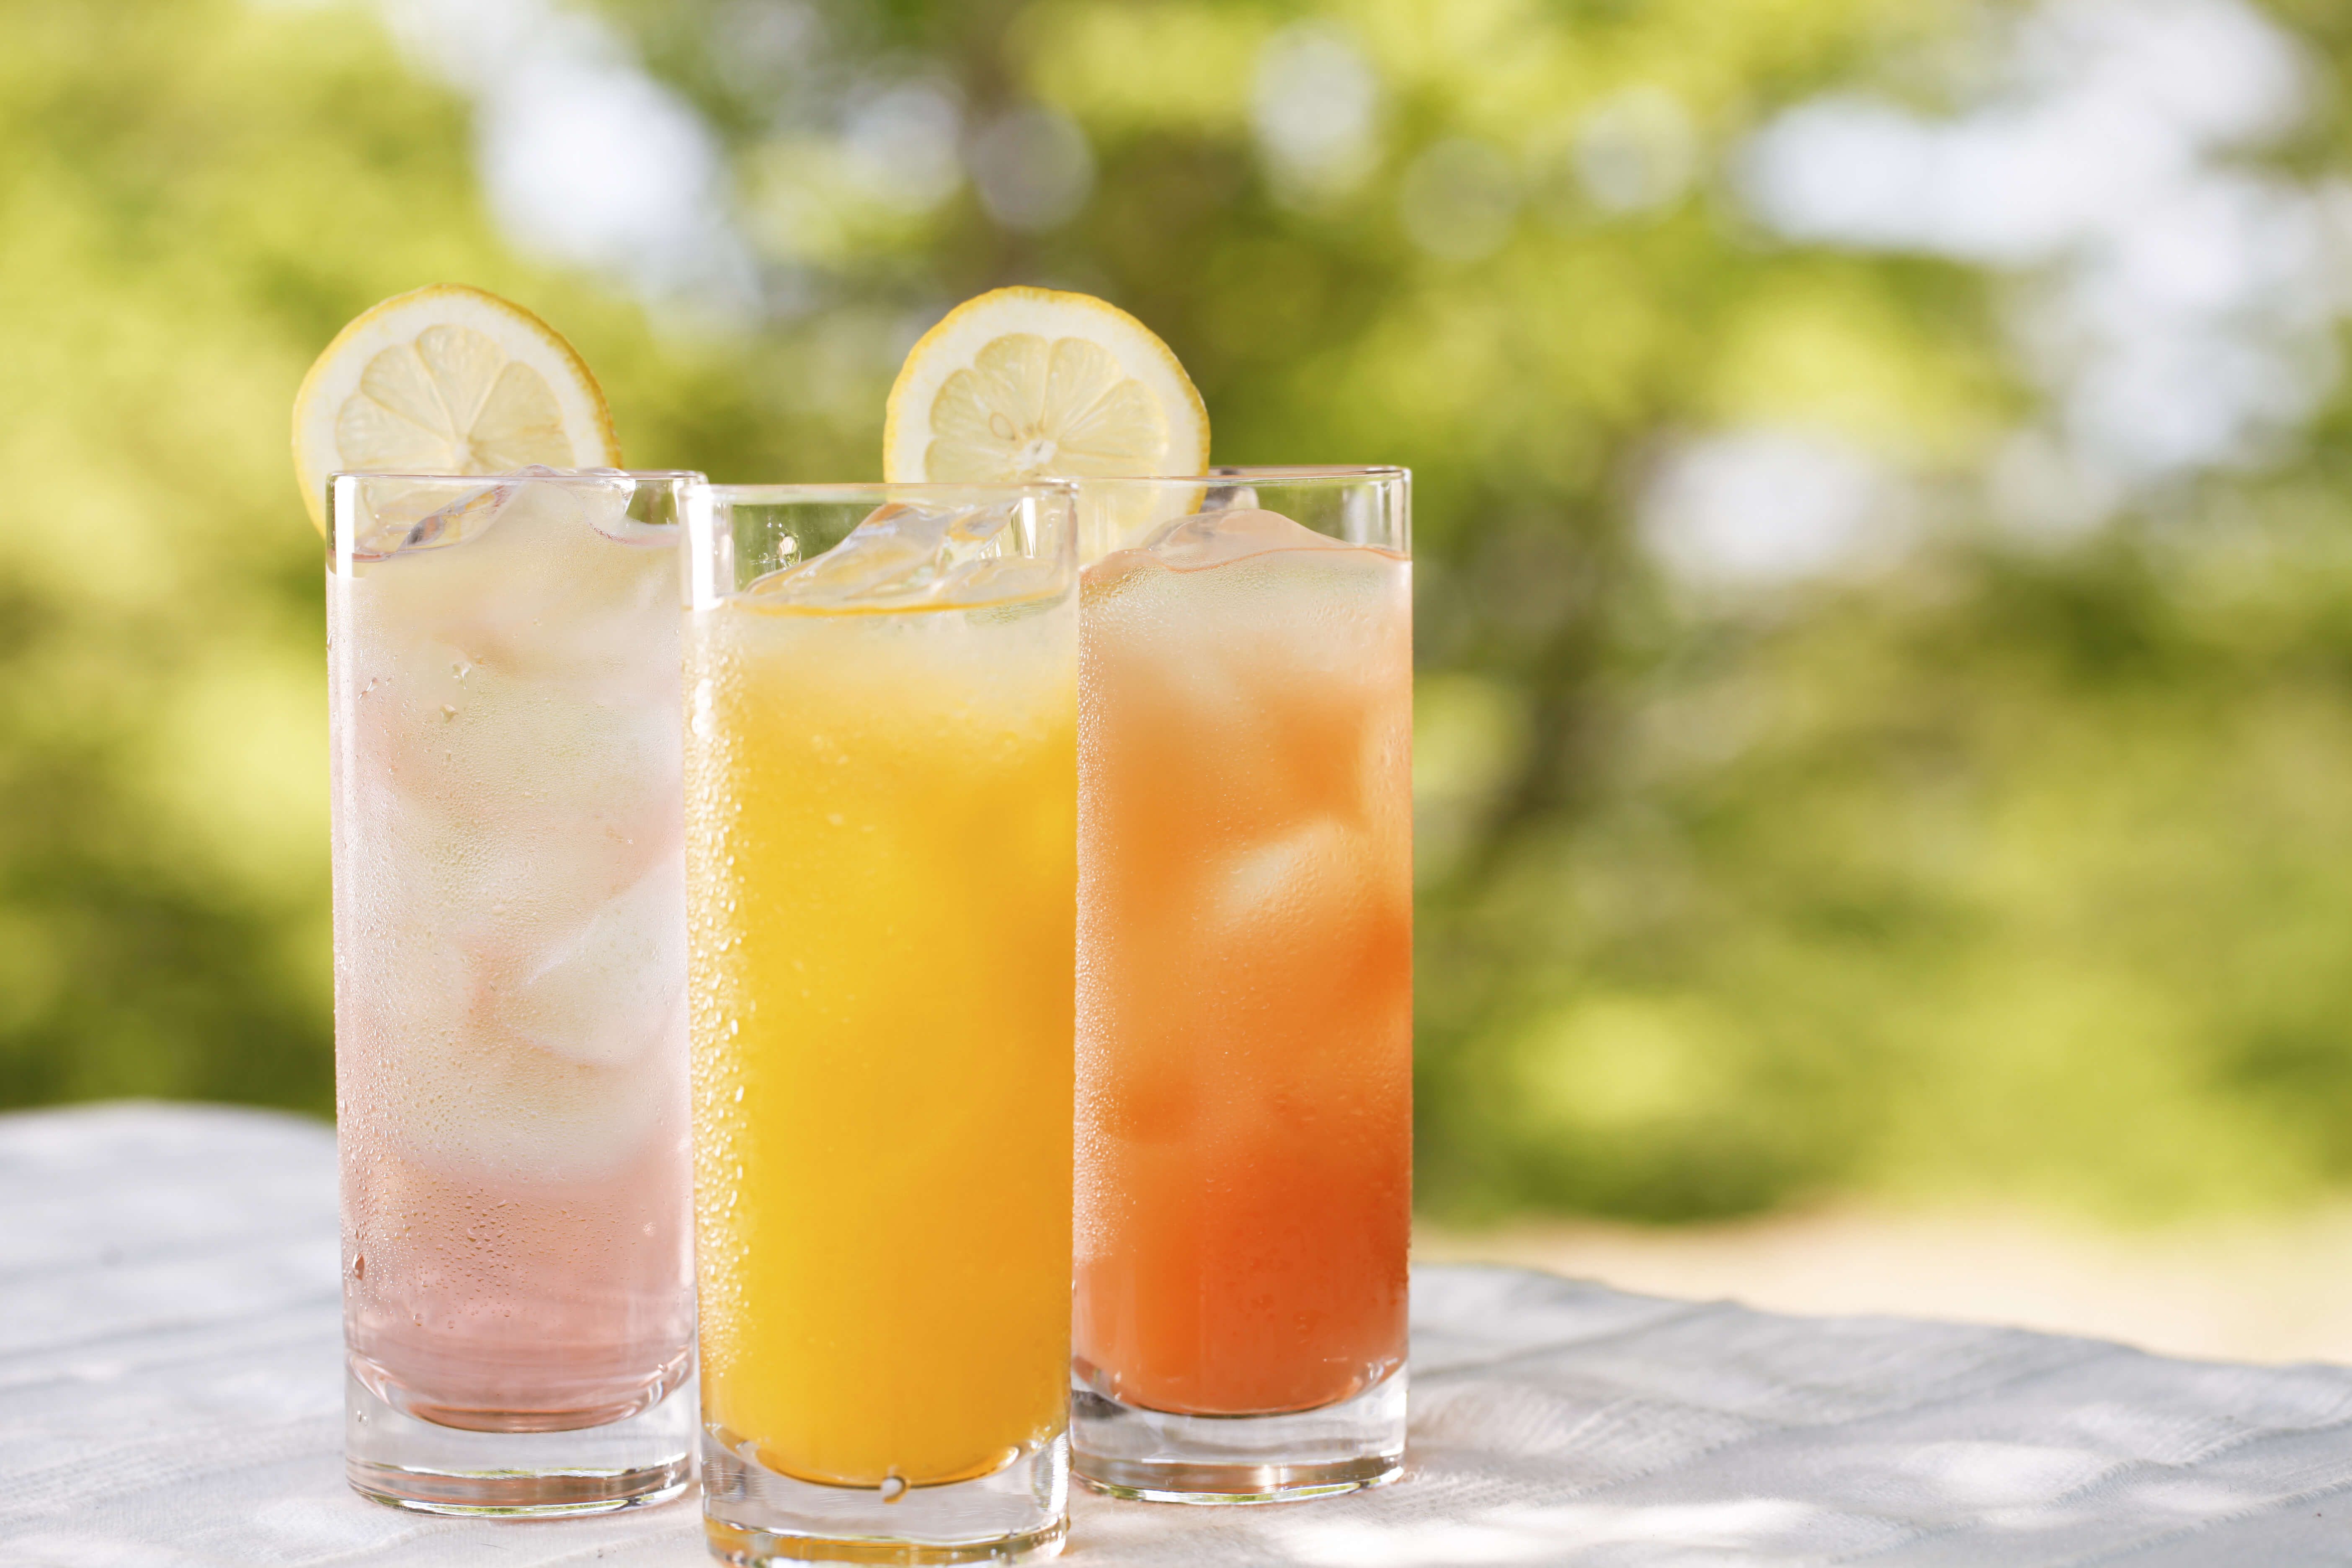 Gin and rum are both great spirits for summer mixed drinks.